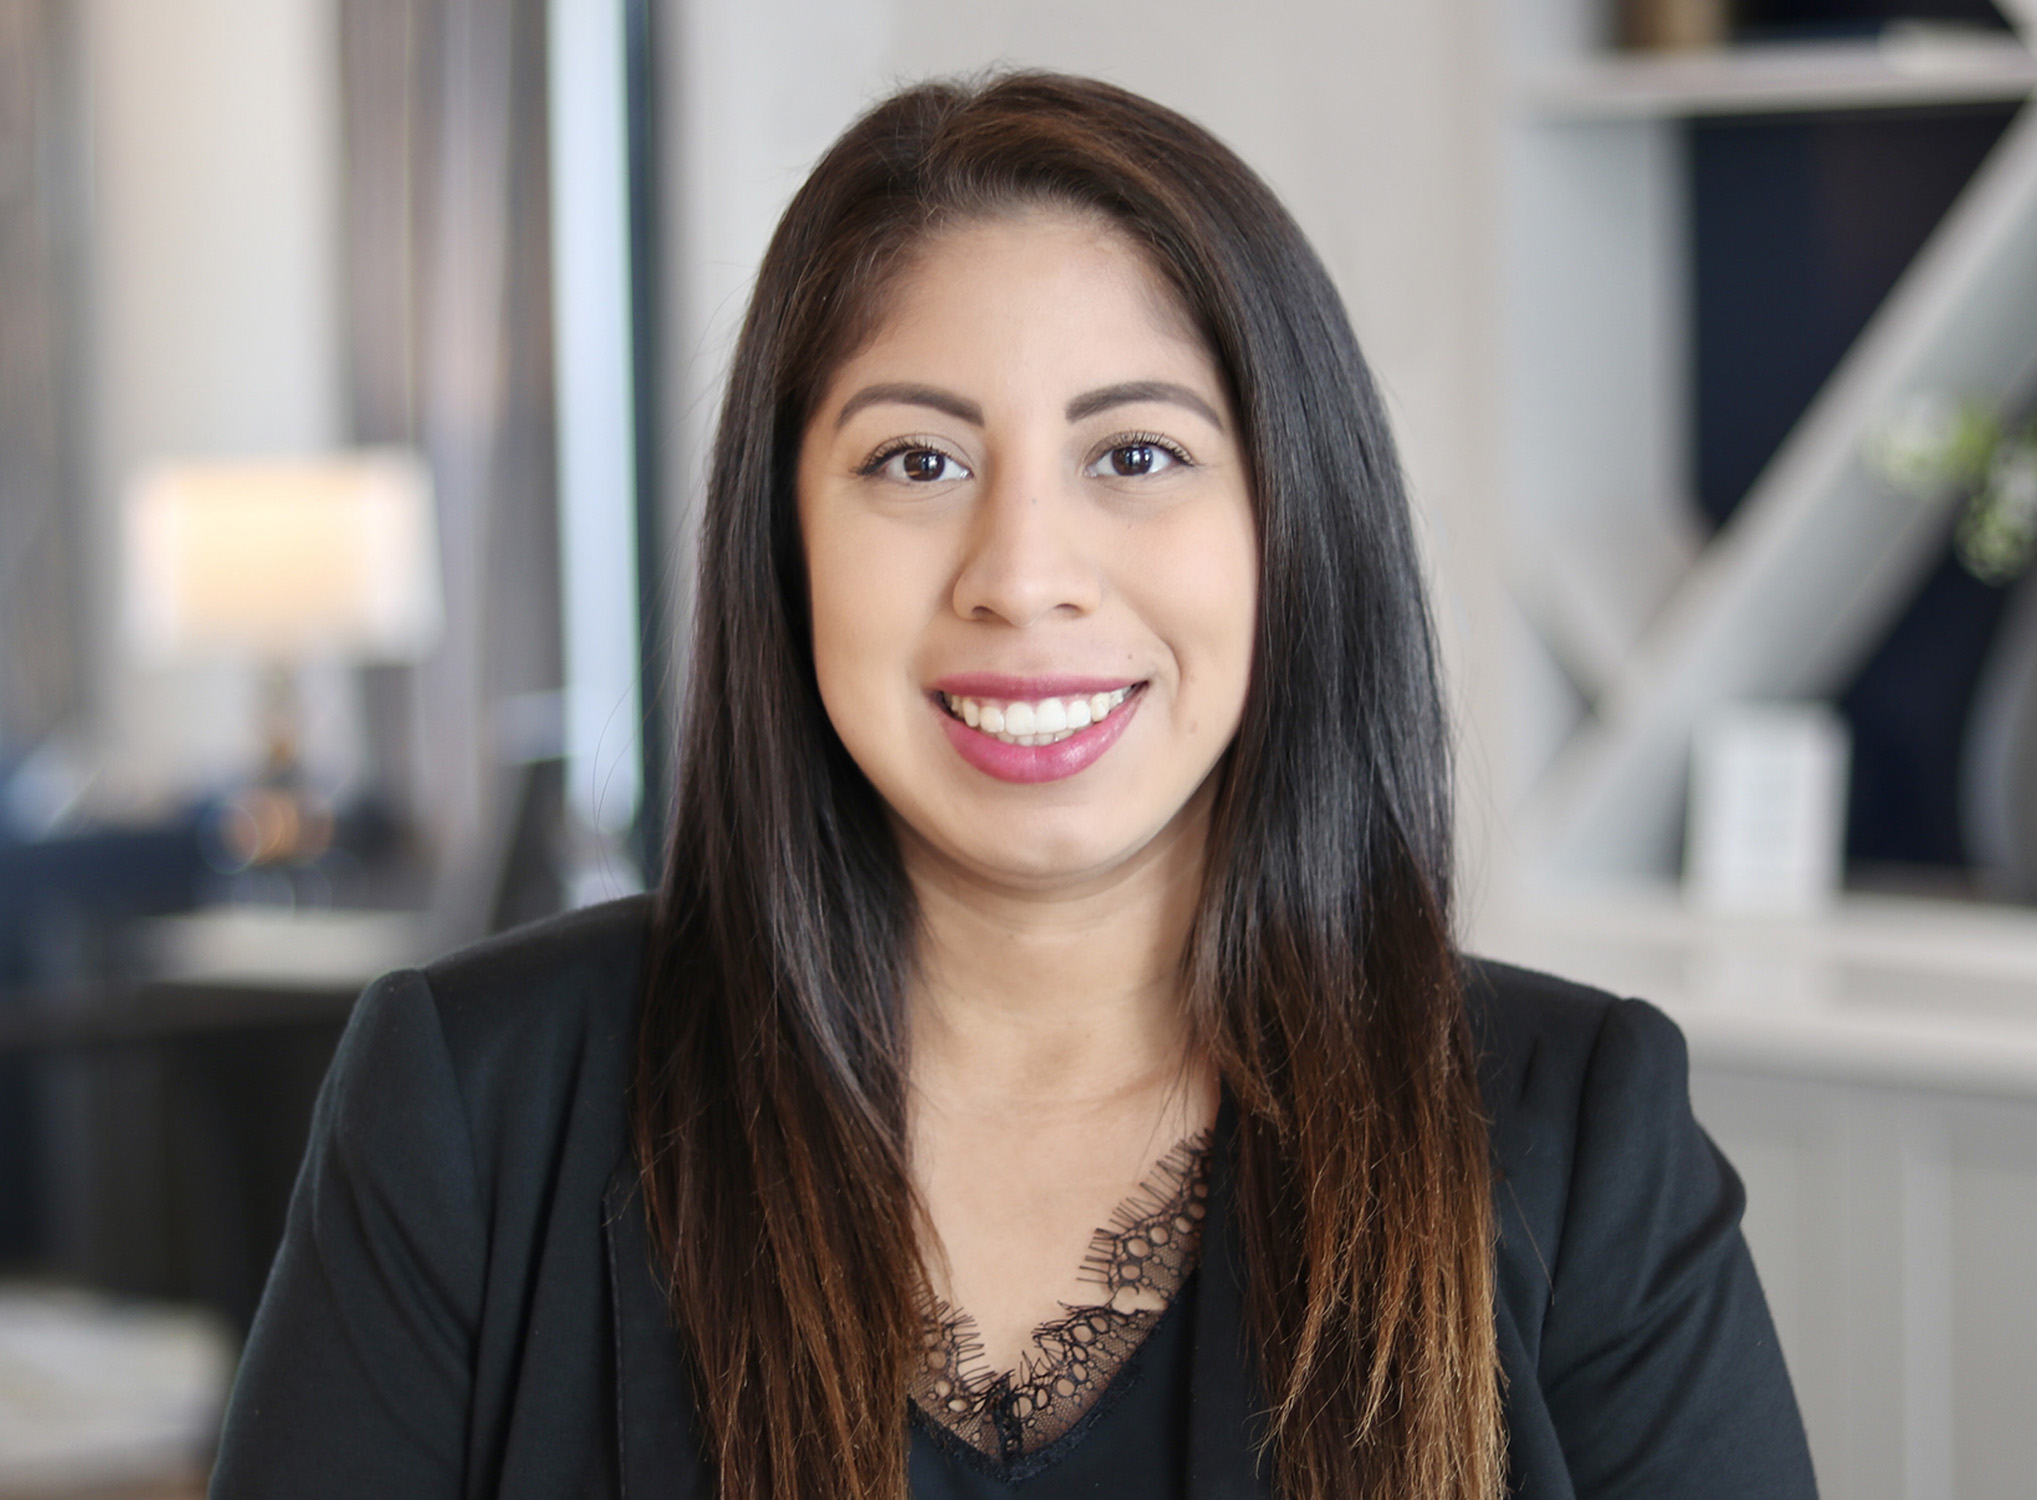 MEET MONICA MORALES, ASSISTANT GENERAL MANAGER